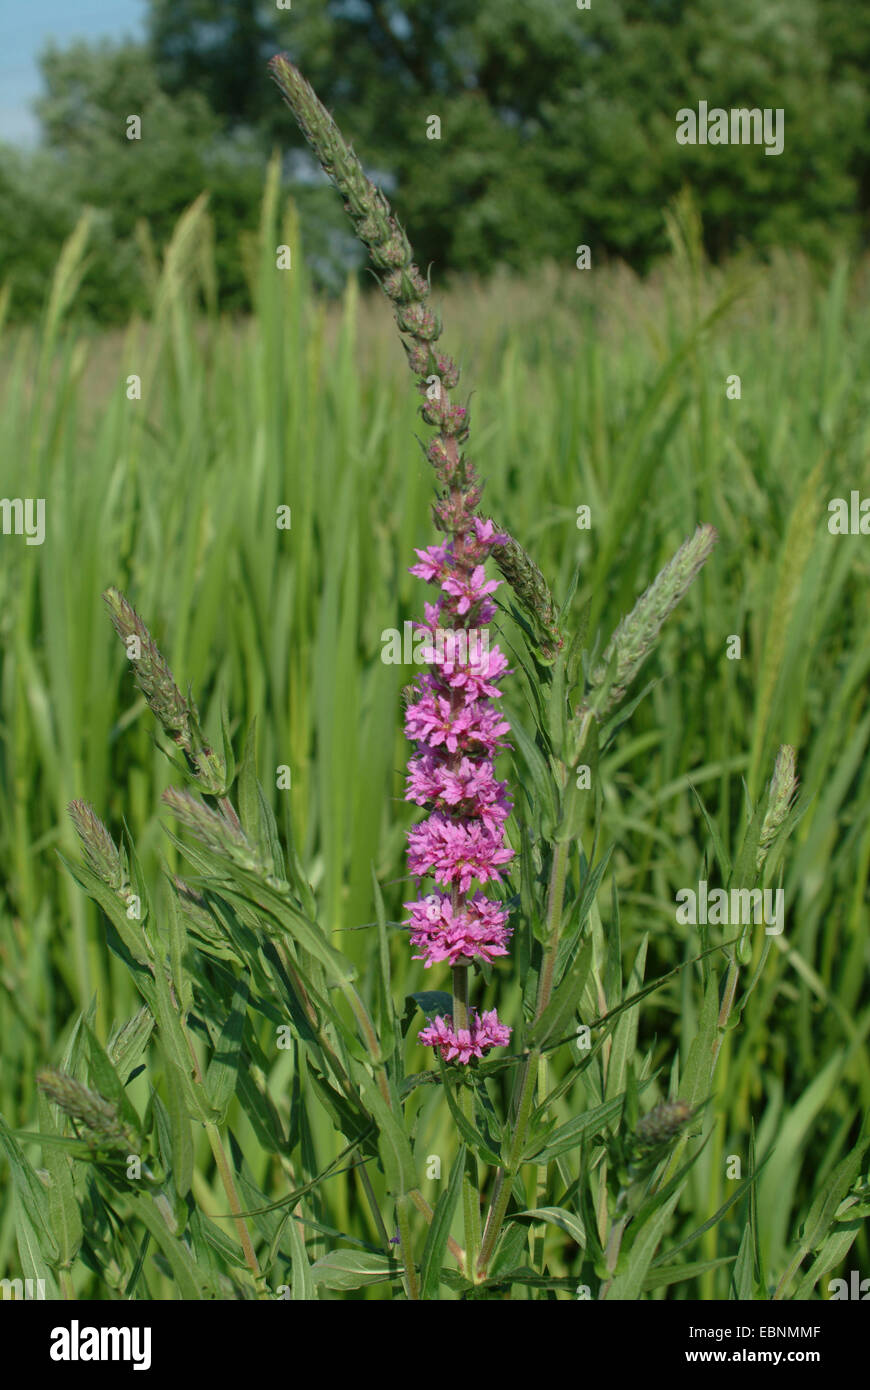 purple loosestrife, spiked loosestrife (Lythrum salicaria), inflorescence, Germany Stock Photo